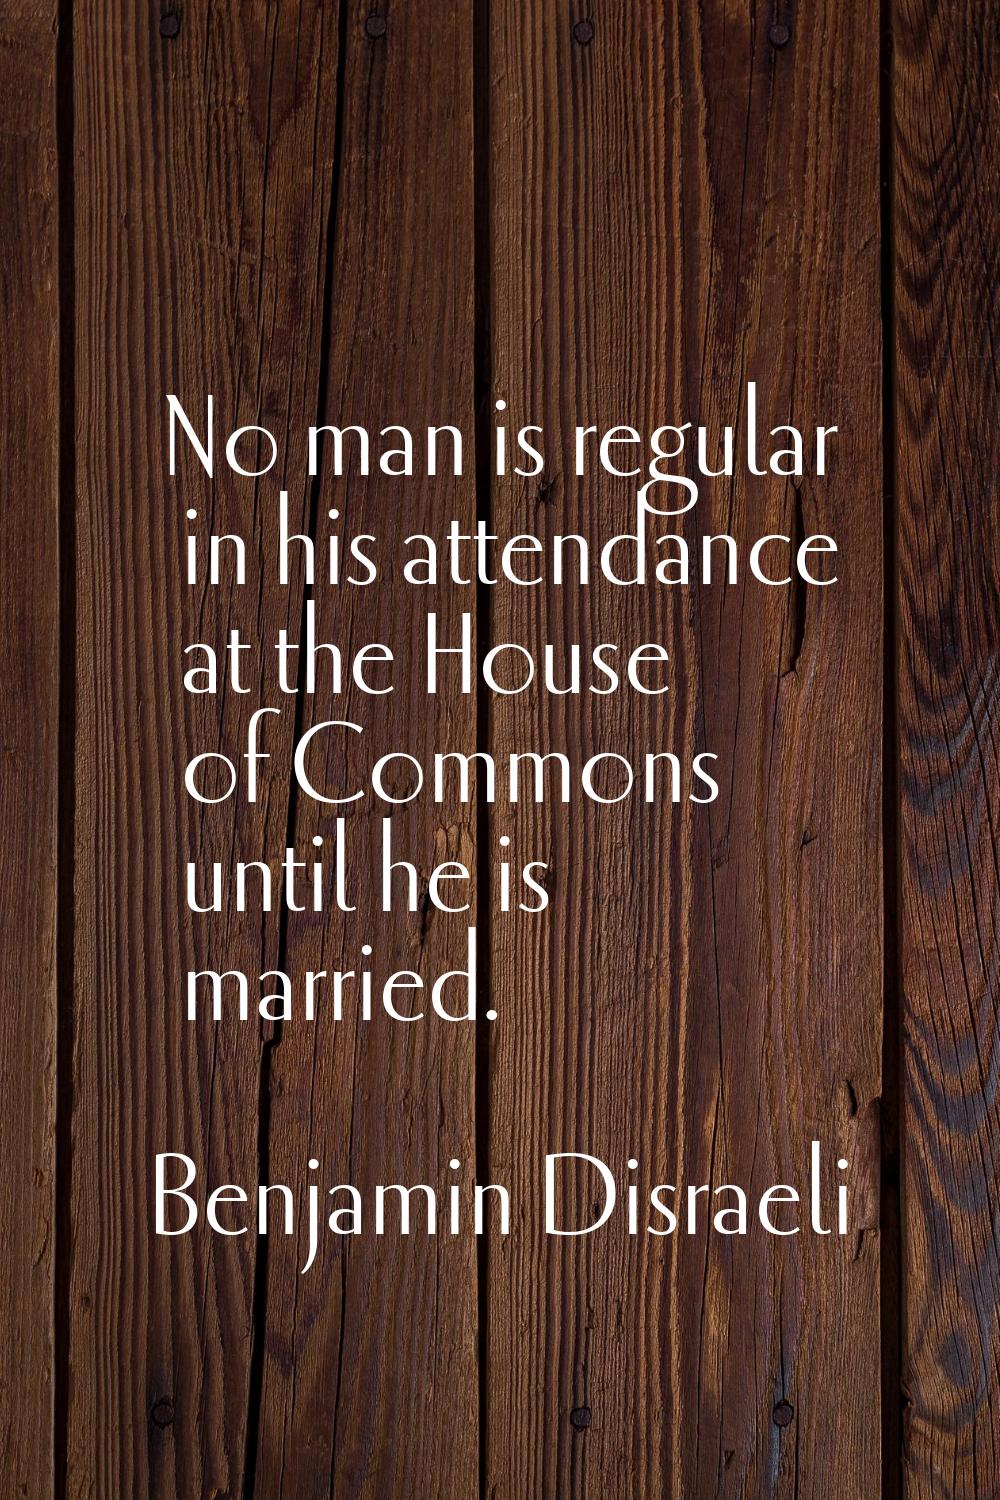 No man is regular in his attendance at the House of Commons until he is married.